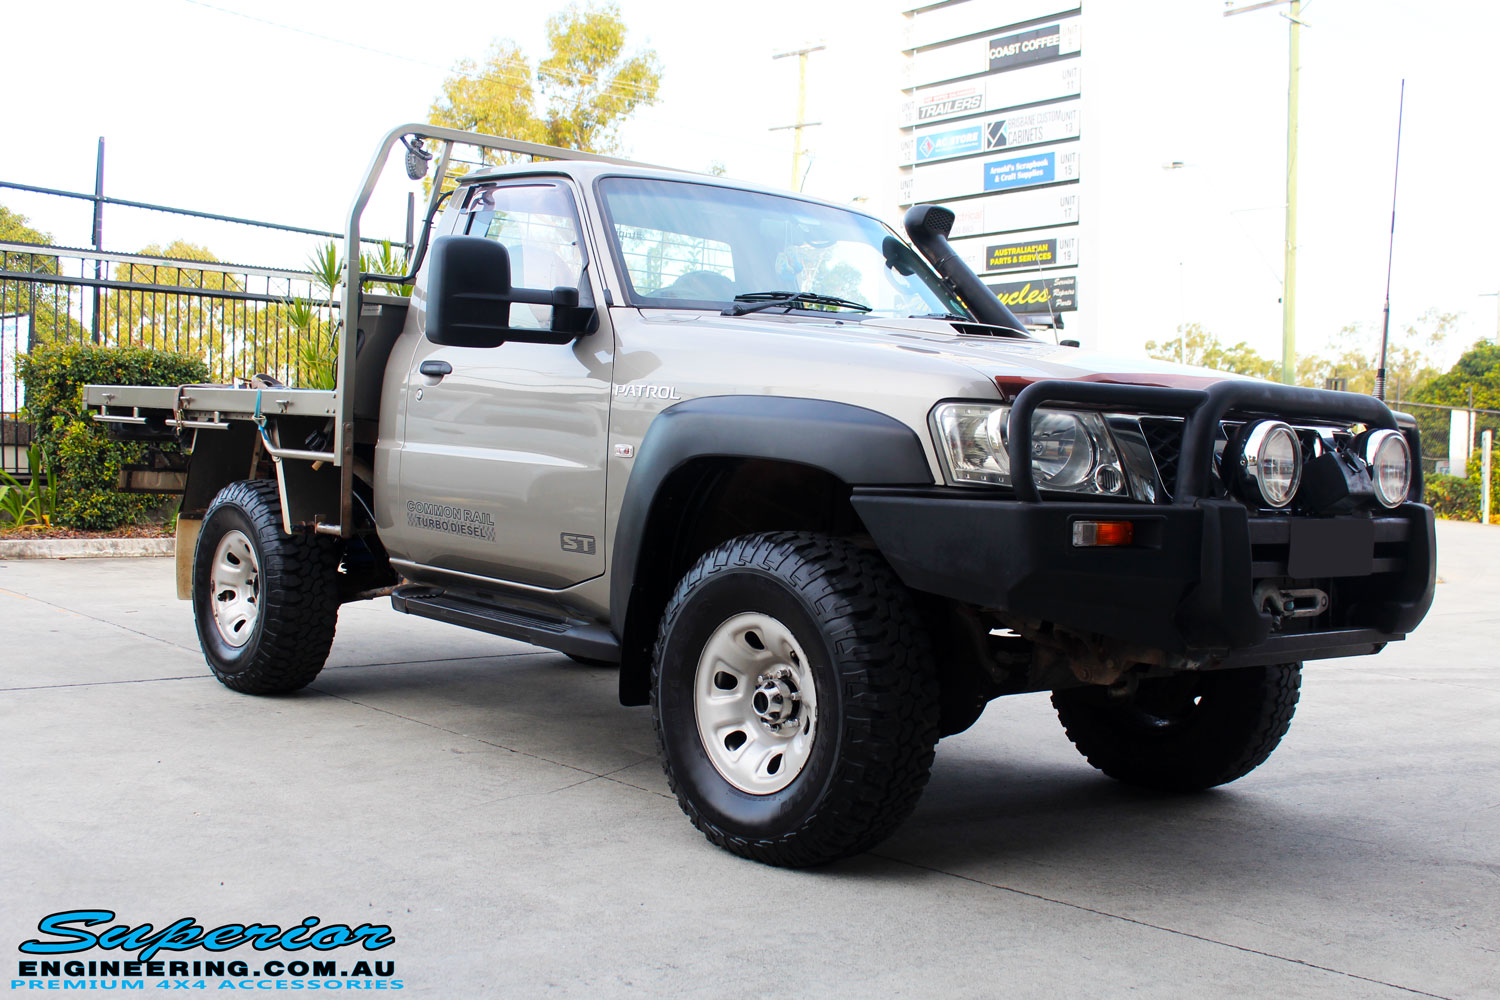 Right front side view of a Nissan GU Patrol Ute in Gold On The Hoist @ Superior Engineering Deception Bay Showroom